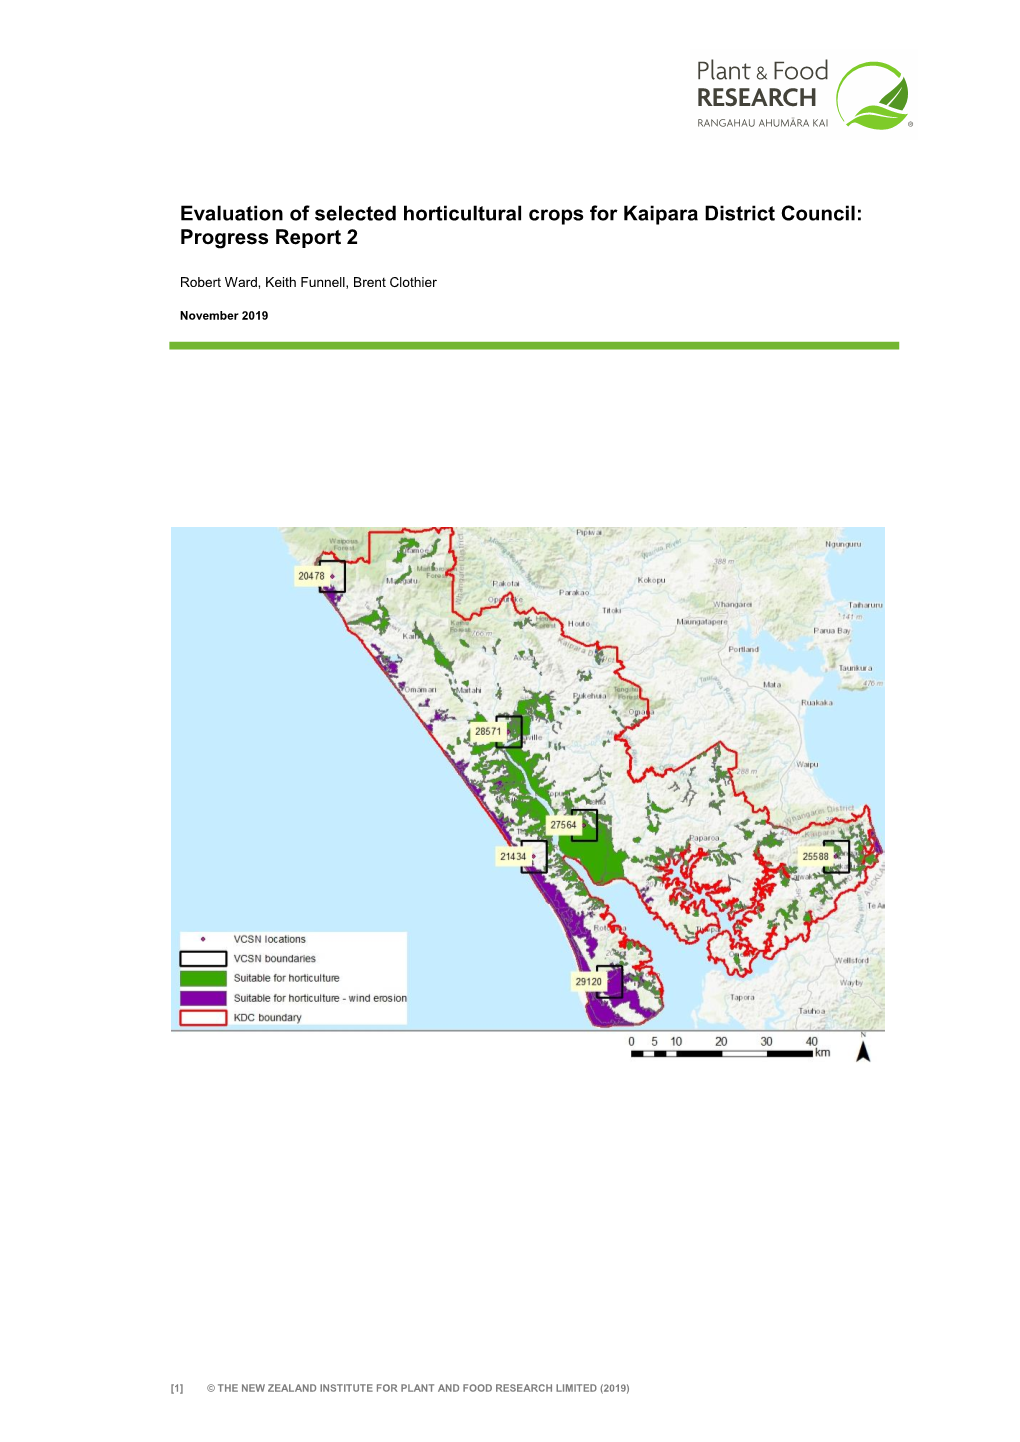 Evaluation of Selected Horticultural Crops for Kaipara District Council: Progress Report 2